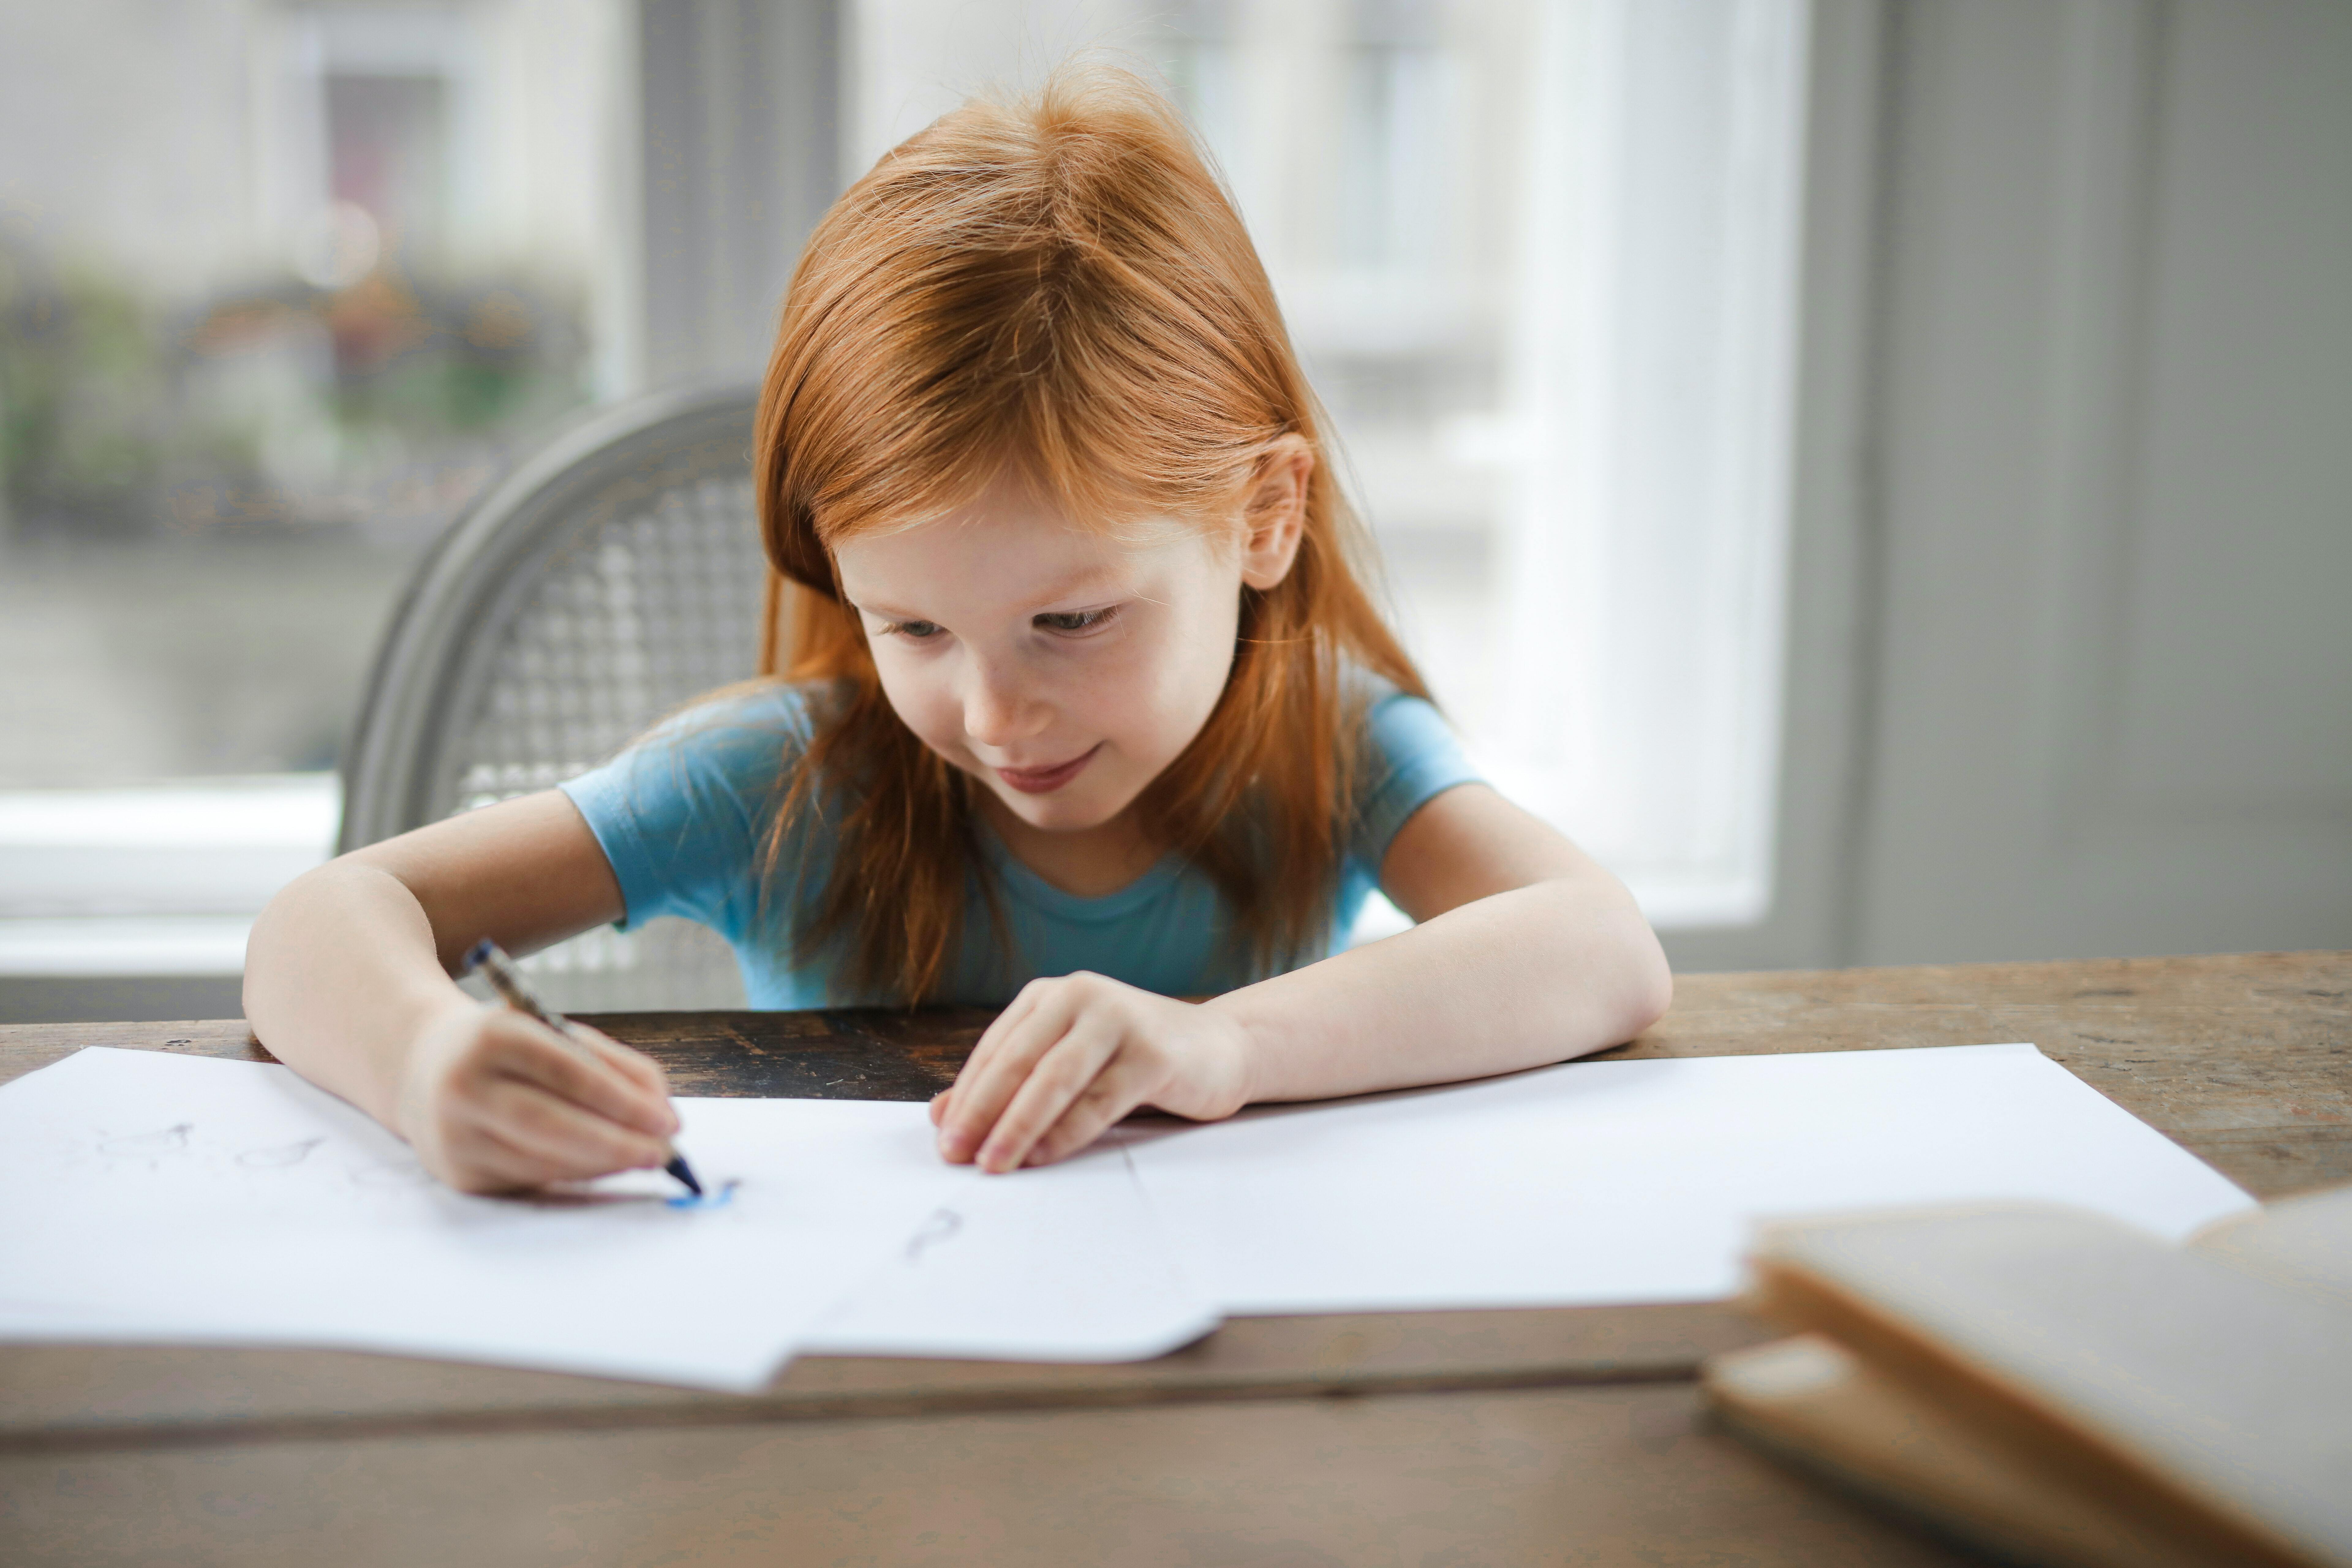 A child writing a test